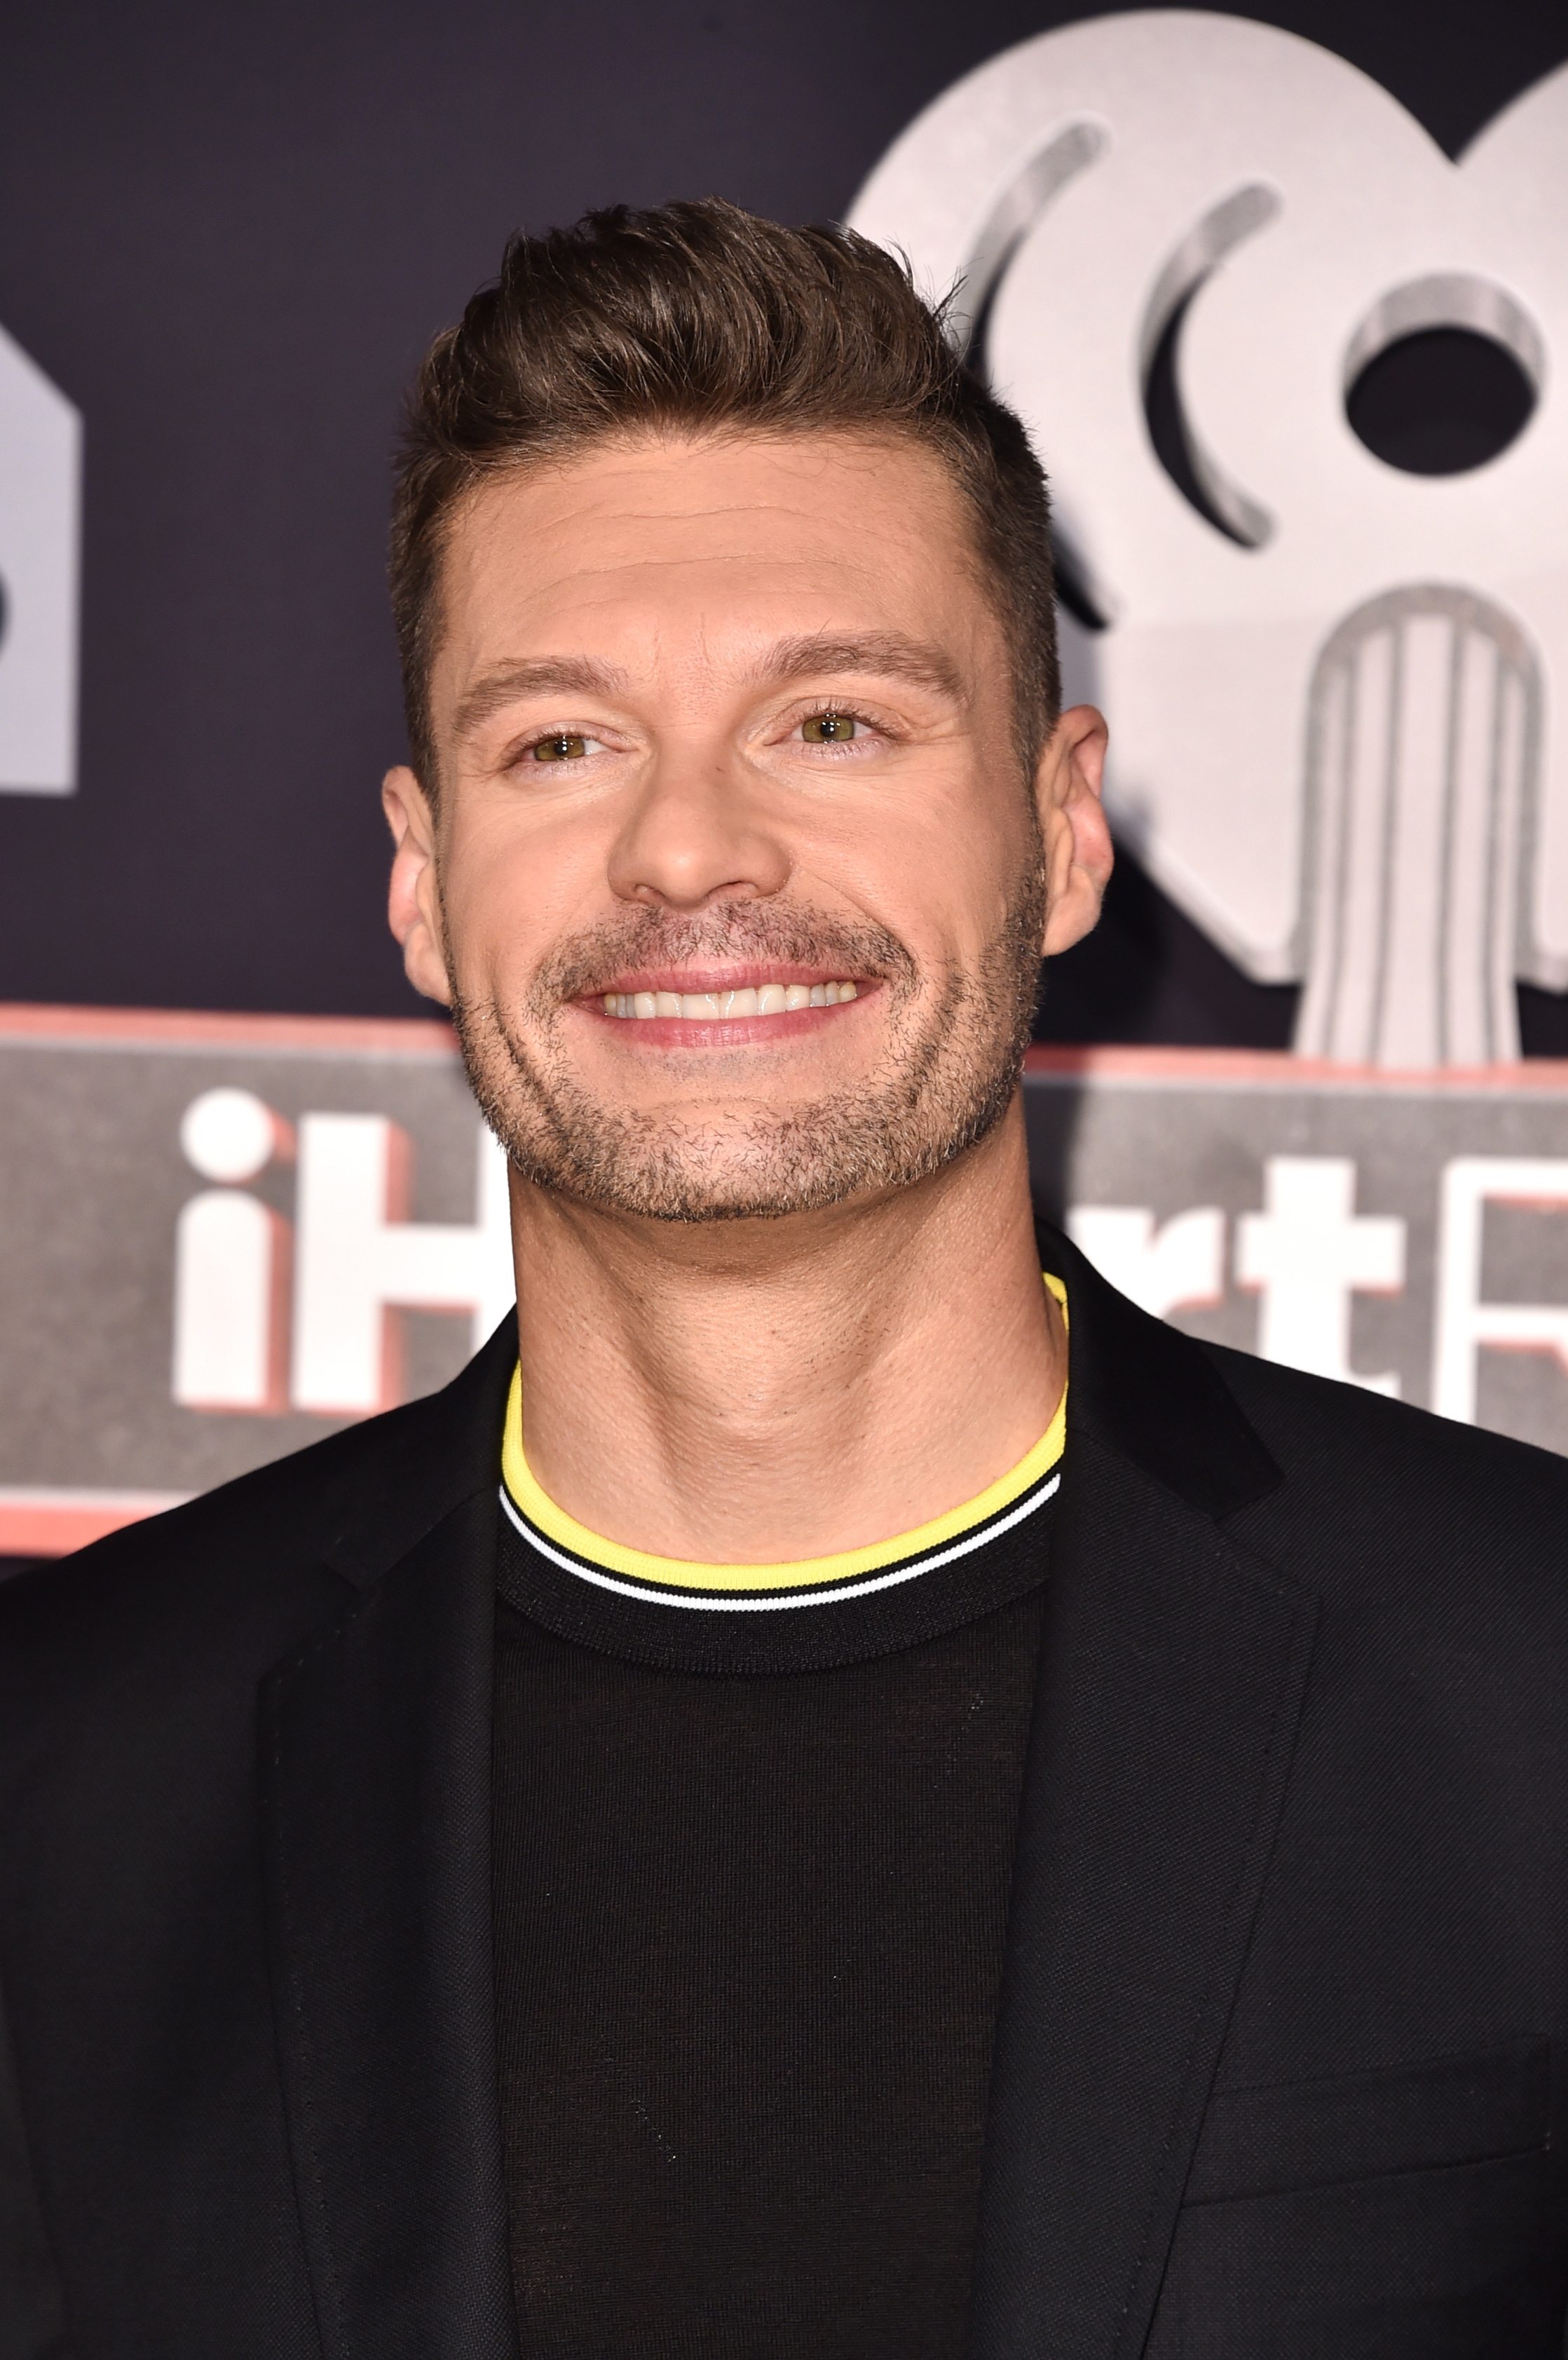 Ryan Seacrest at the iHeartRadio Music Awards